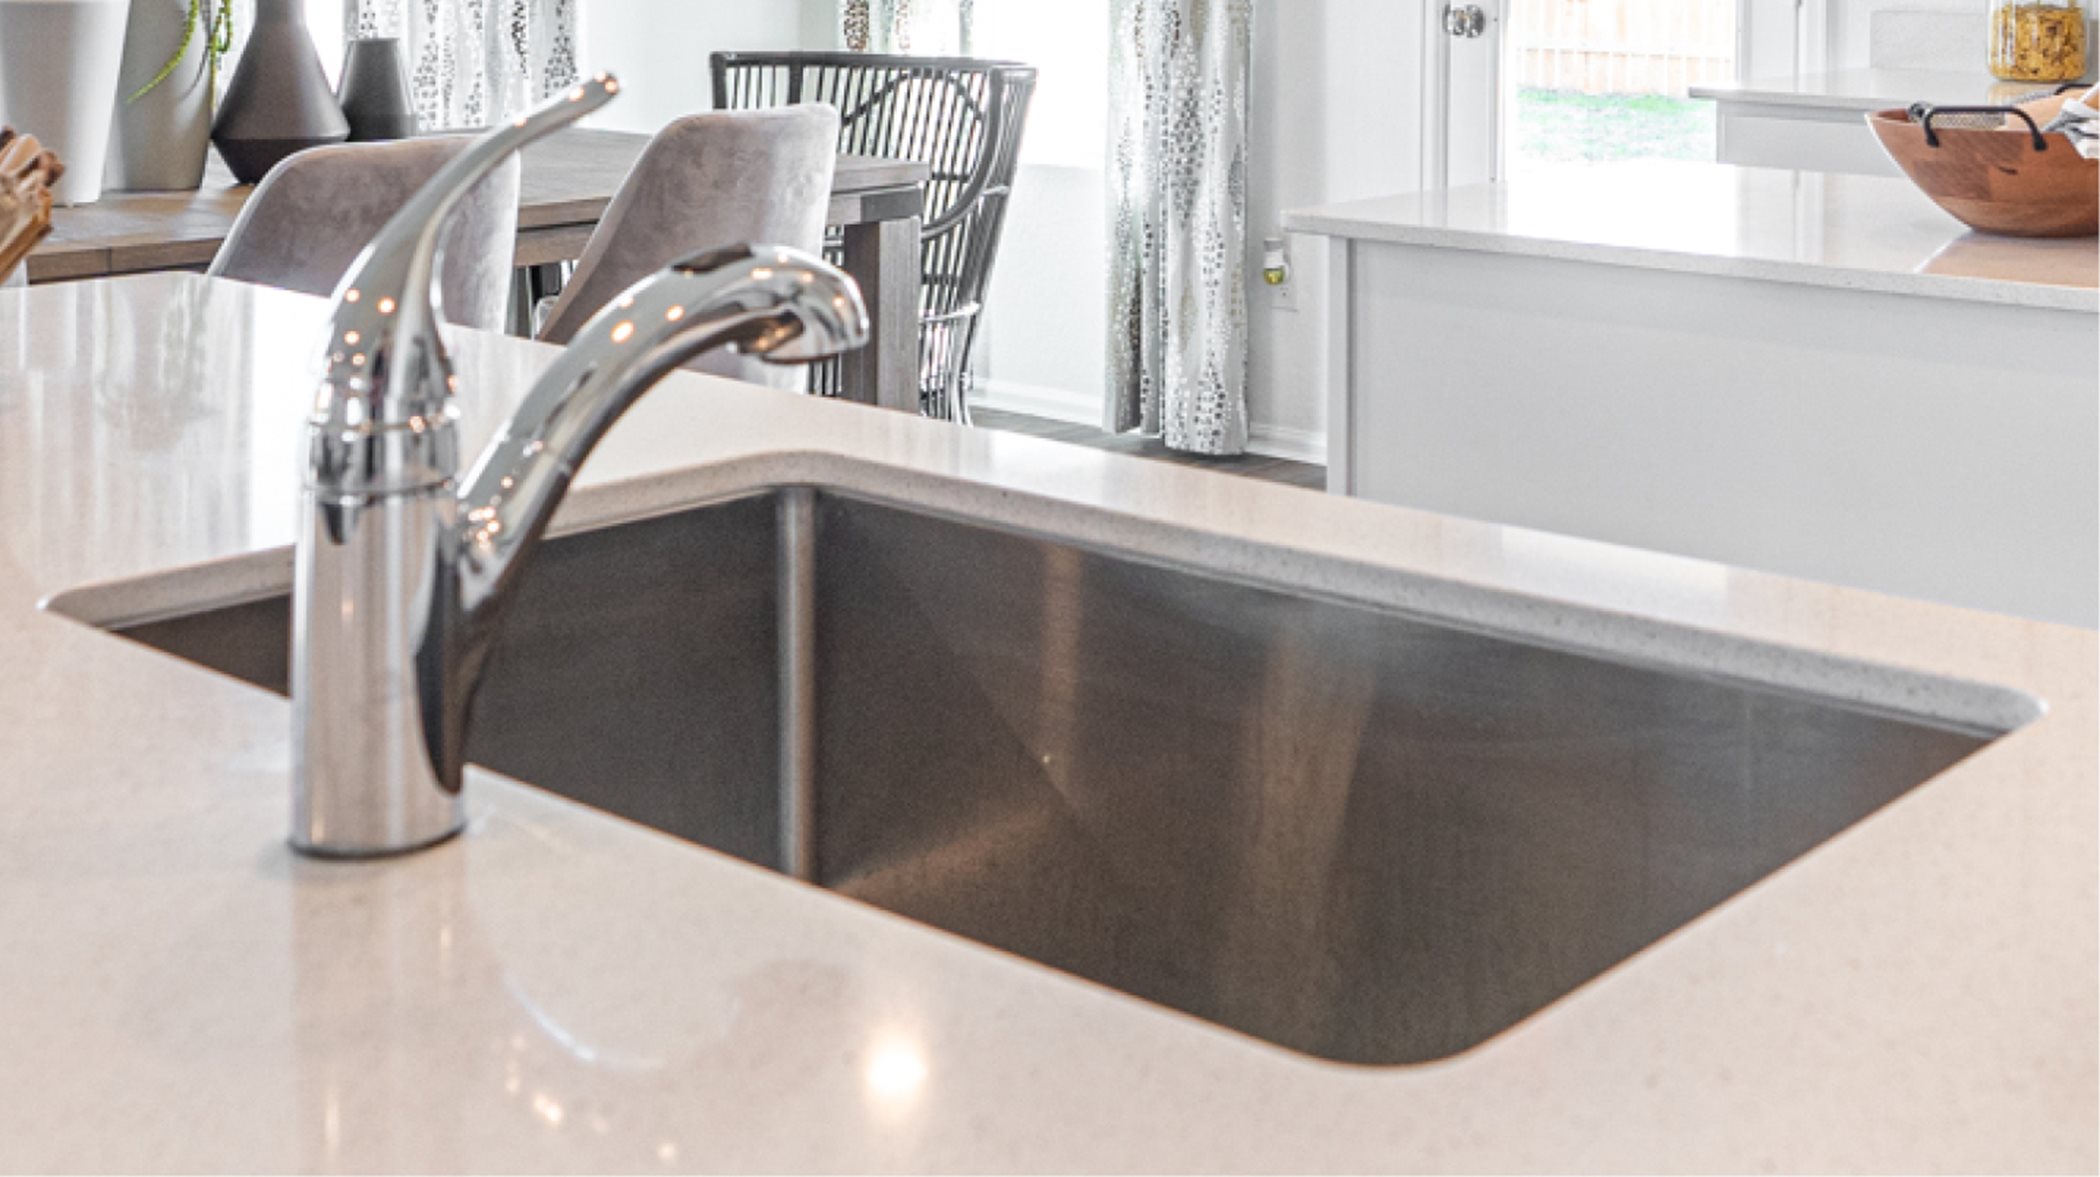 stainless steel single basin sink and chrome faucet